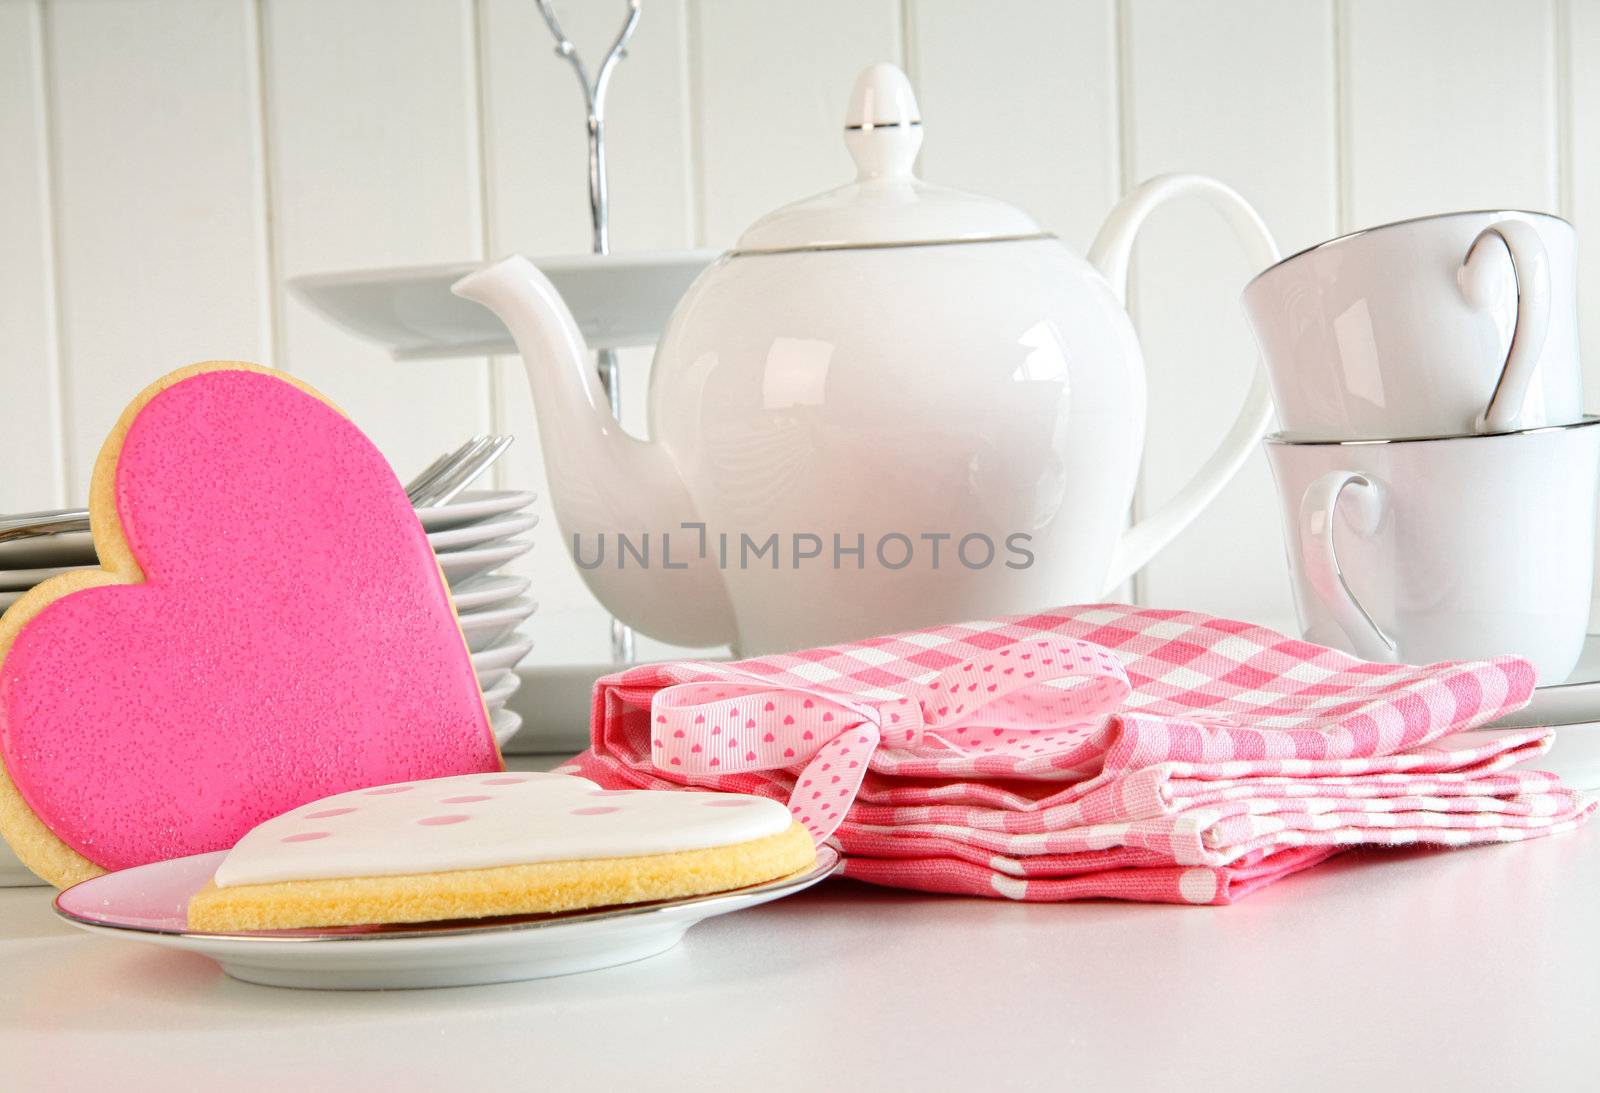 Heart-shape valentine cookies with teapot and cups on kitchen counter
 